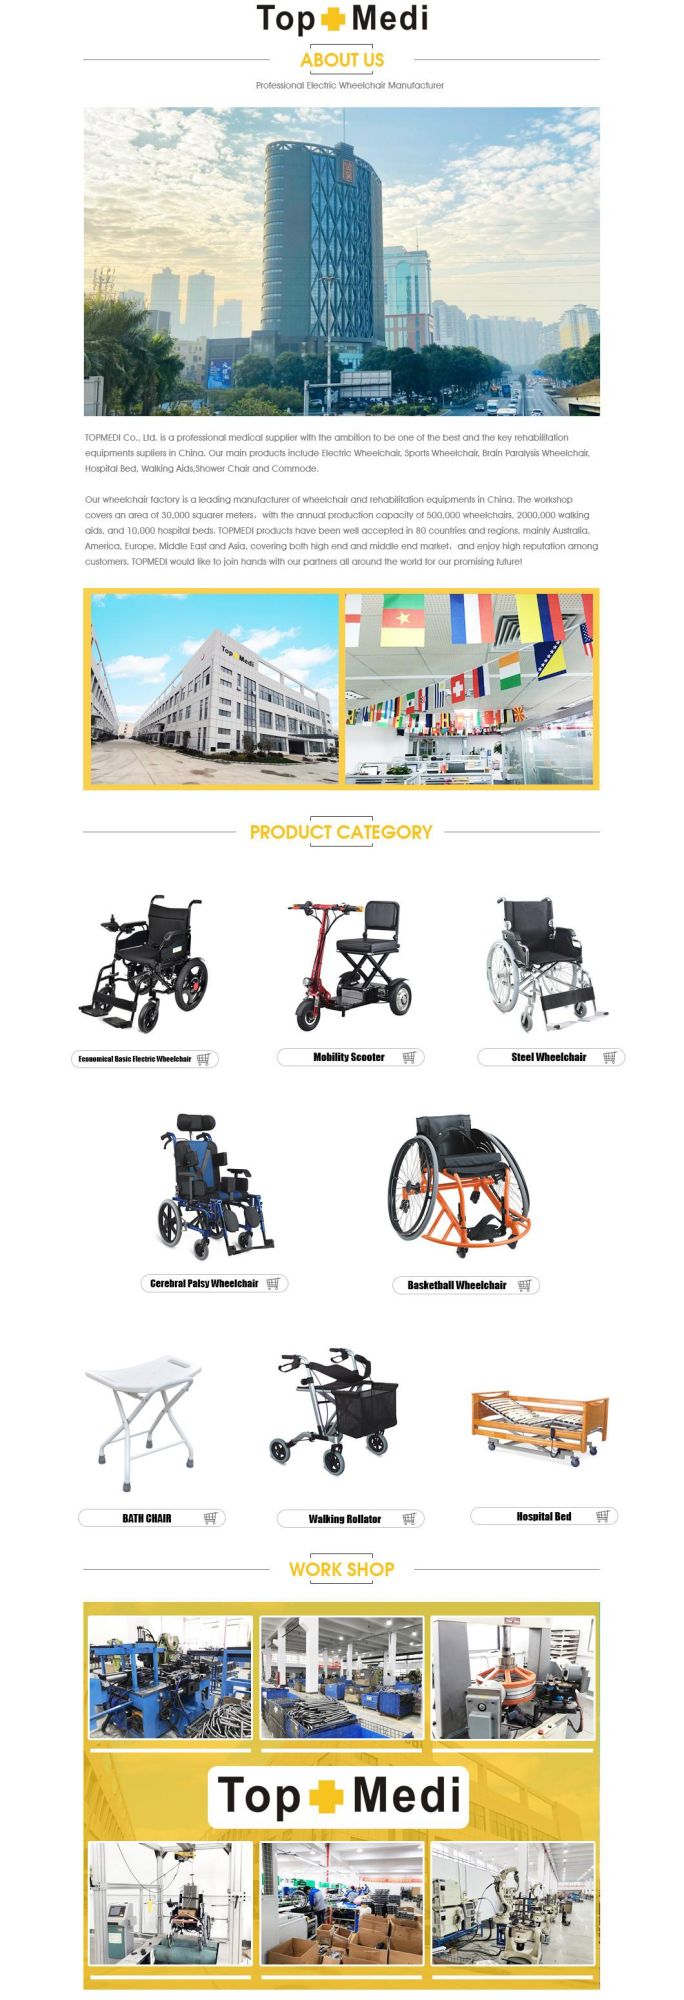 Topmedi Economic Folding and Detachable Panel Manual and Electrical Hospital Bed